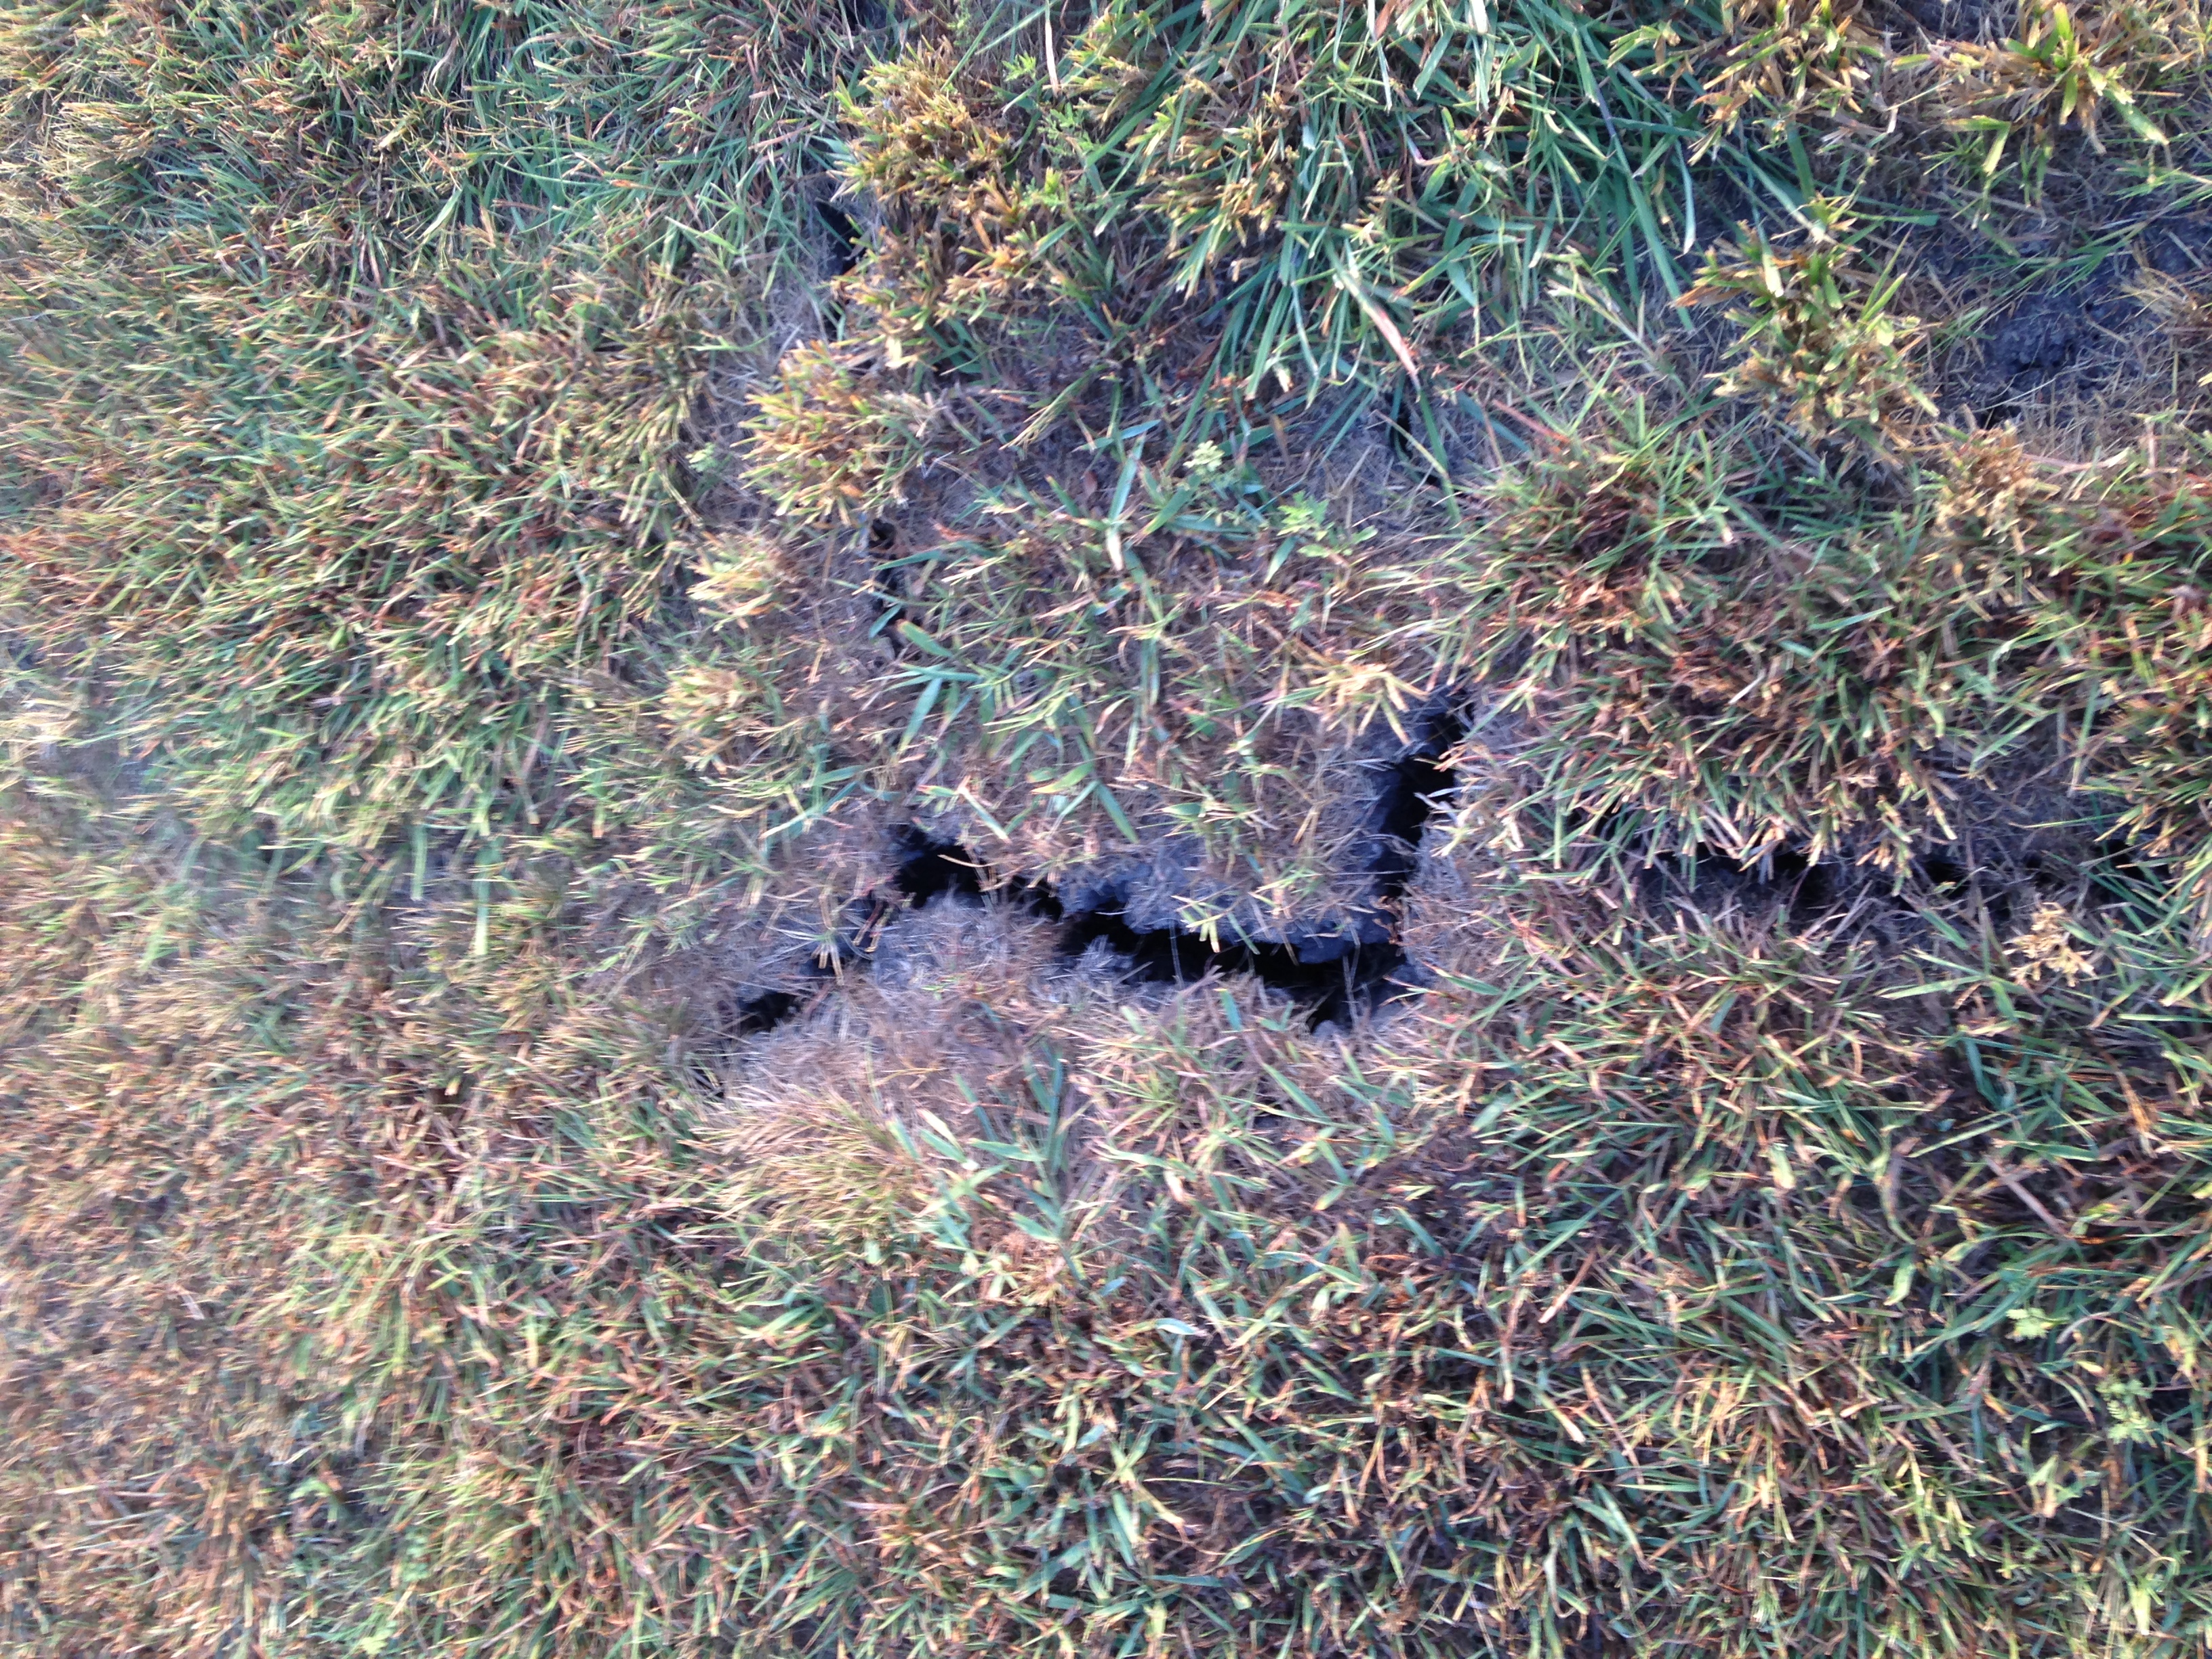 the grass begins to grow in eastern Texas, but cracks prove it's still the desert